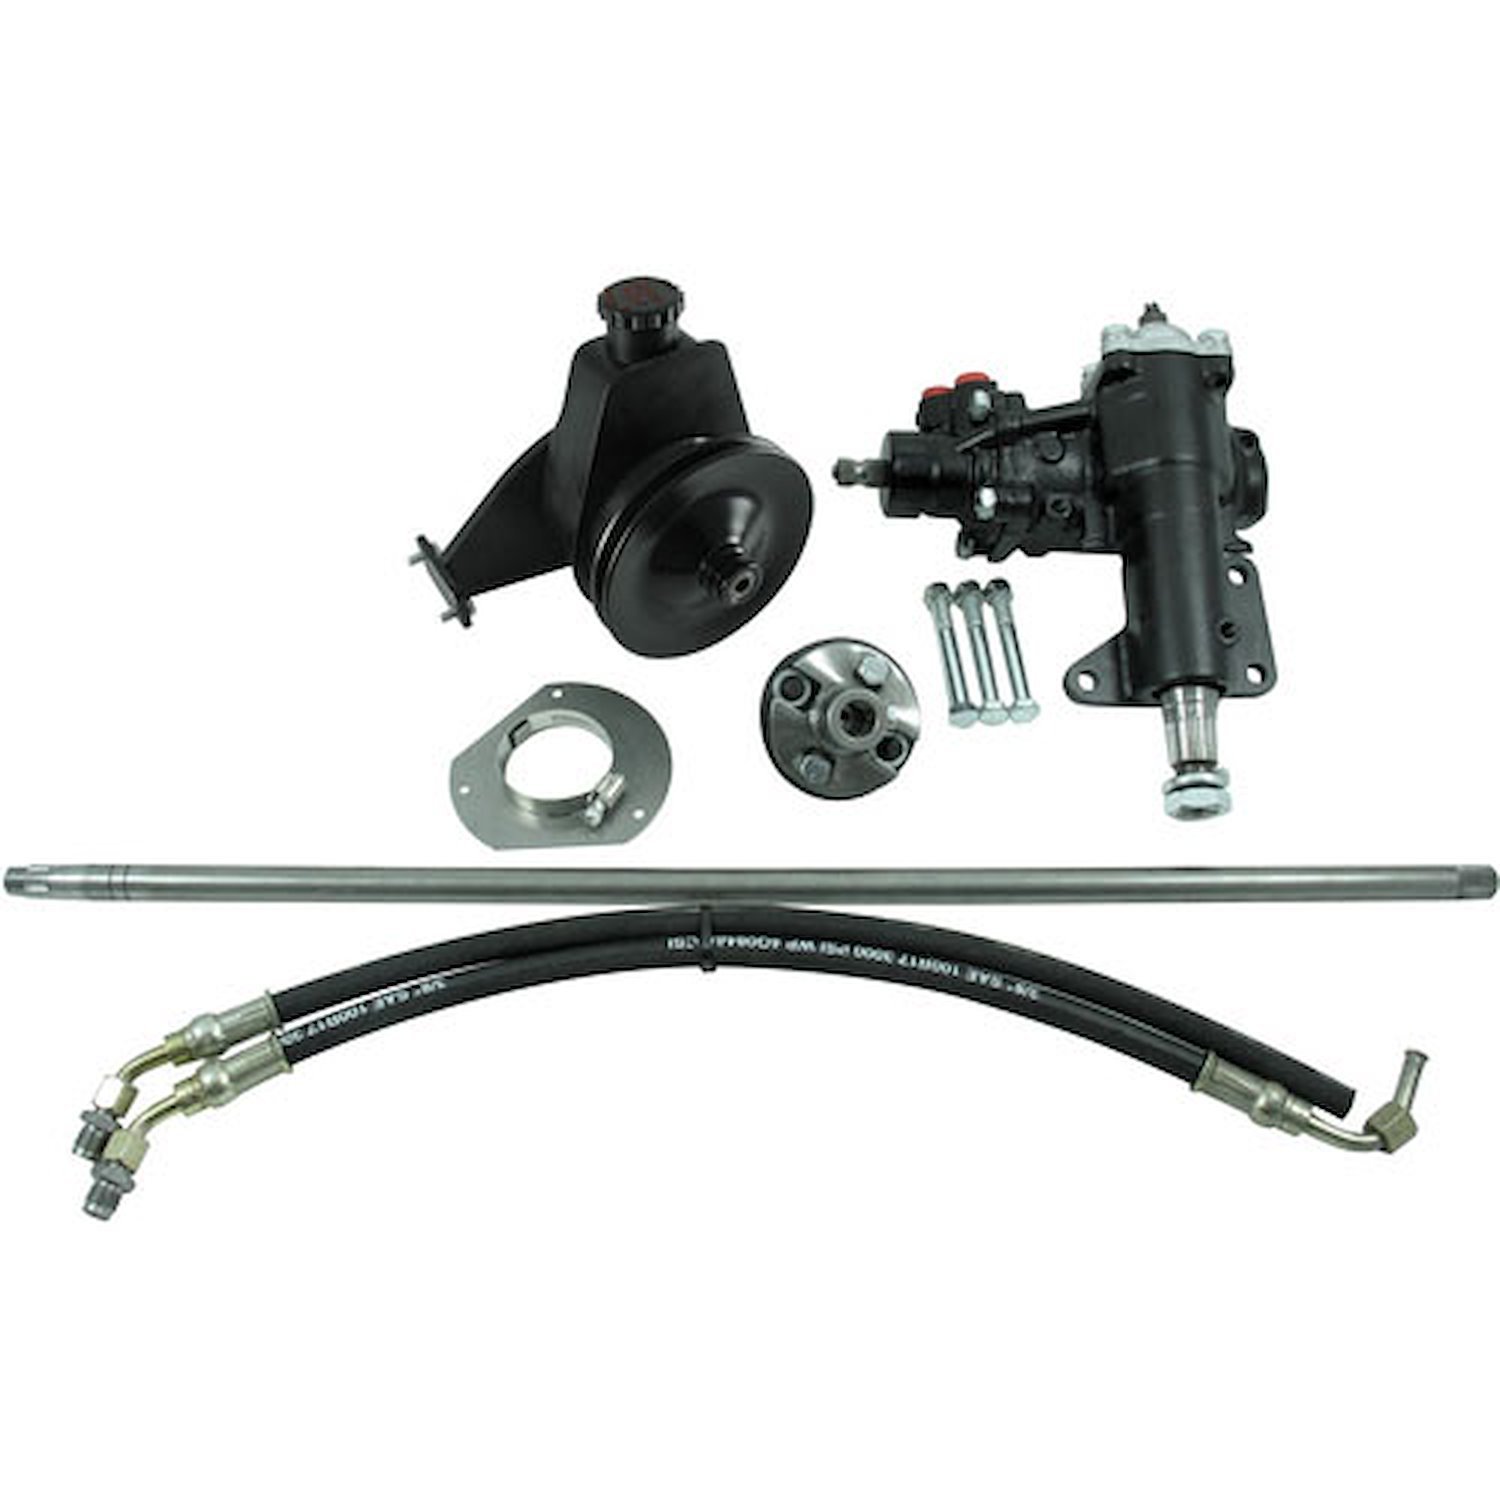 Complete Power Steering Conversion Kit 1965-66 Mustang 200/250 I6